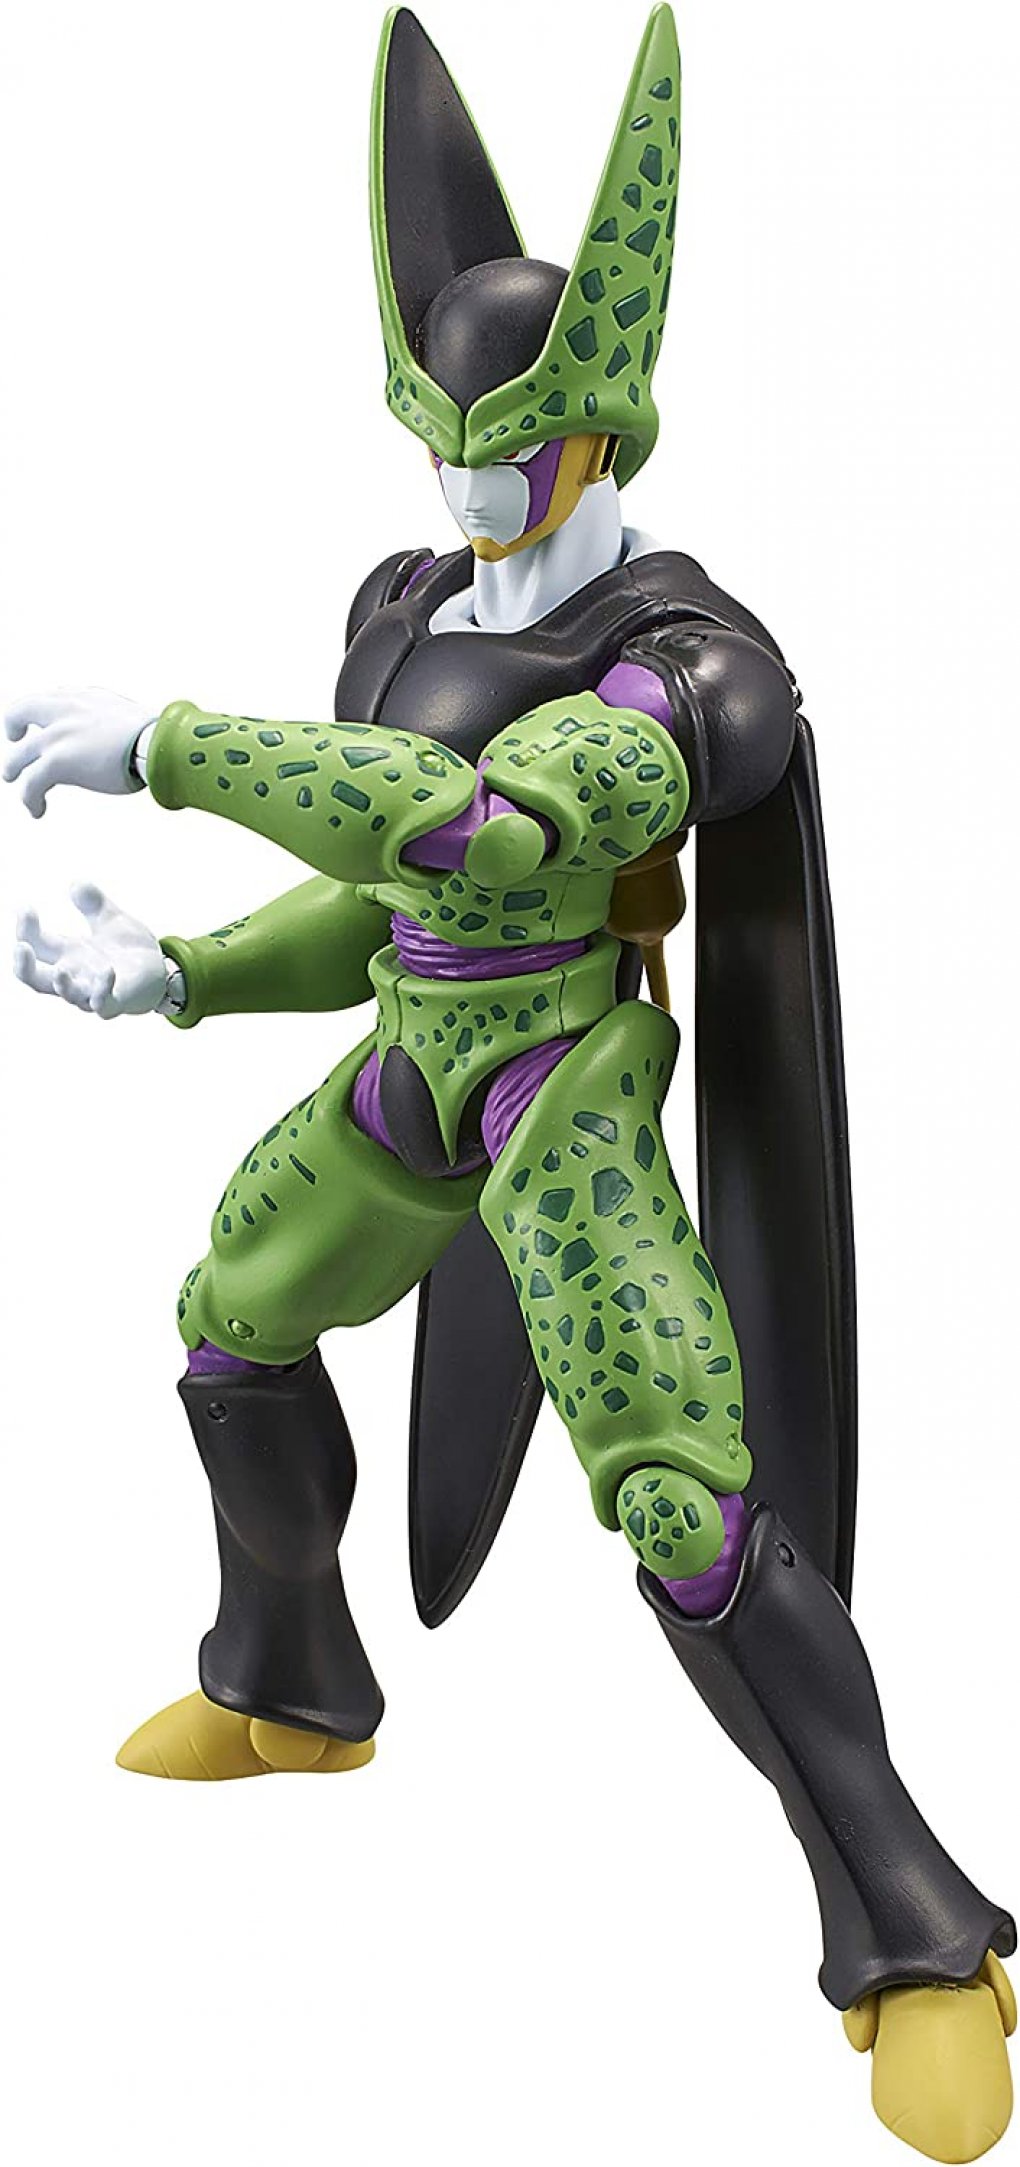 Get the iconic Dragon Ball villain Cell in his ultimate form for a bargain on Prime Day 2022 on Amazon!